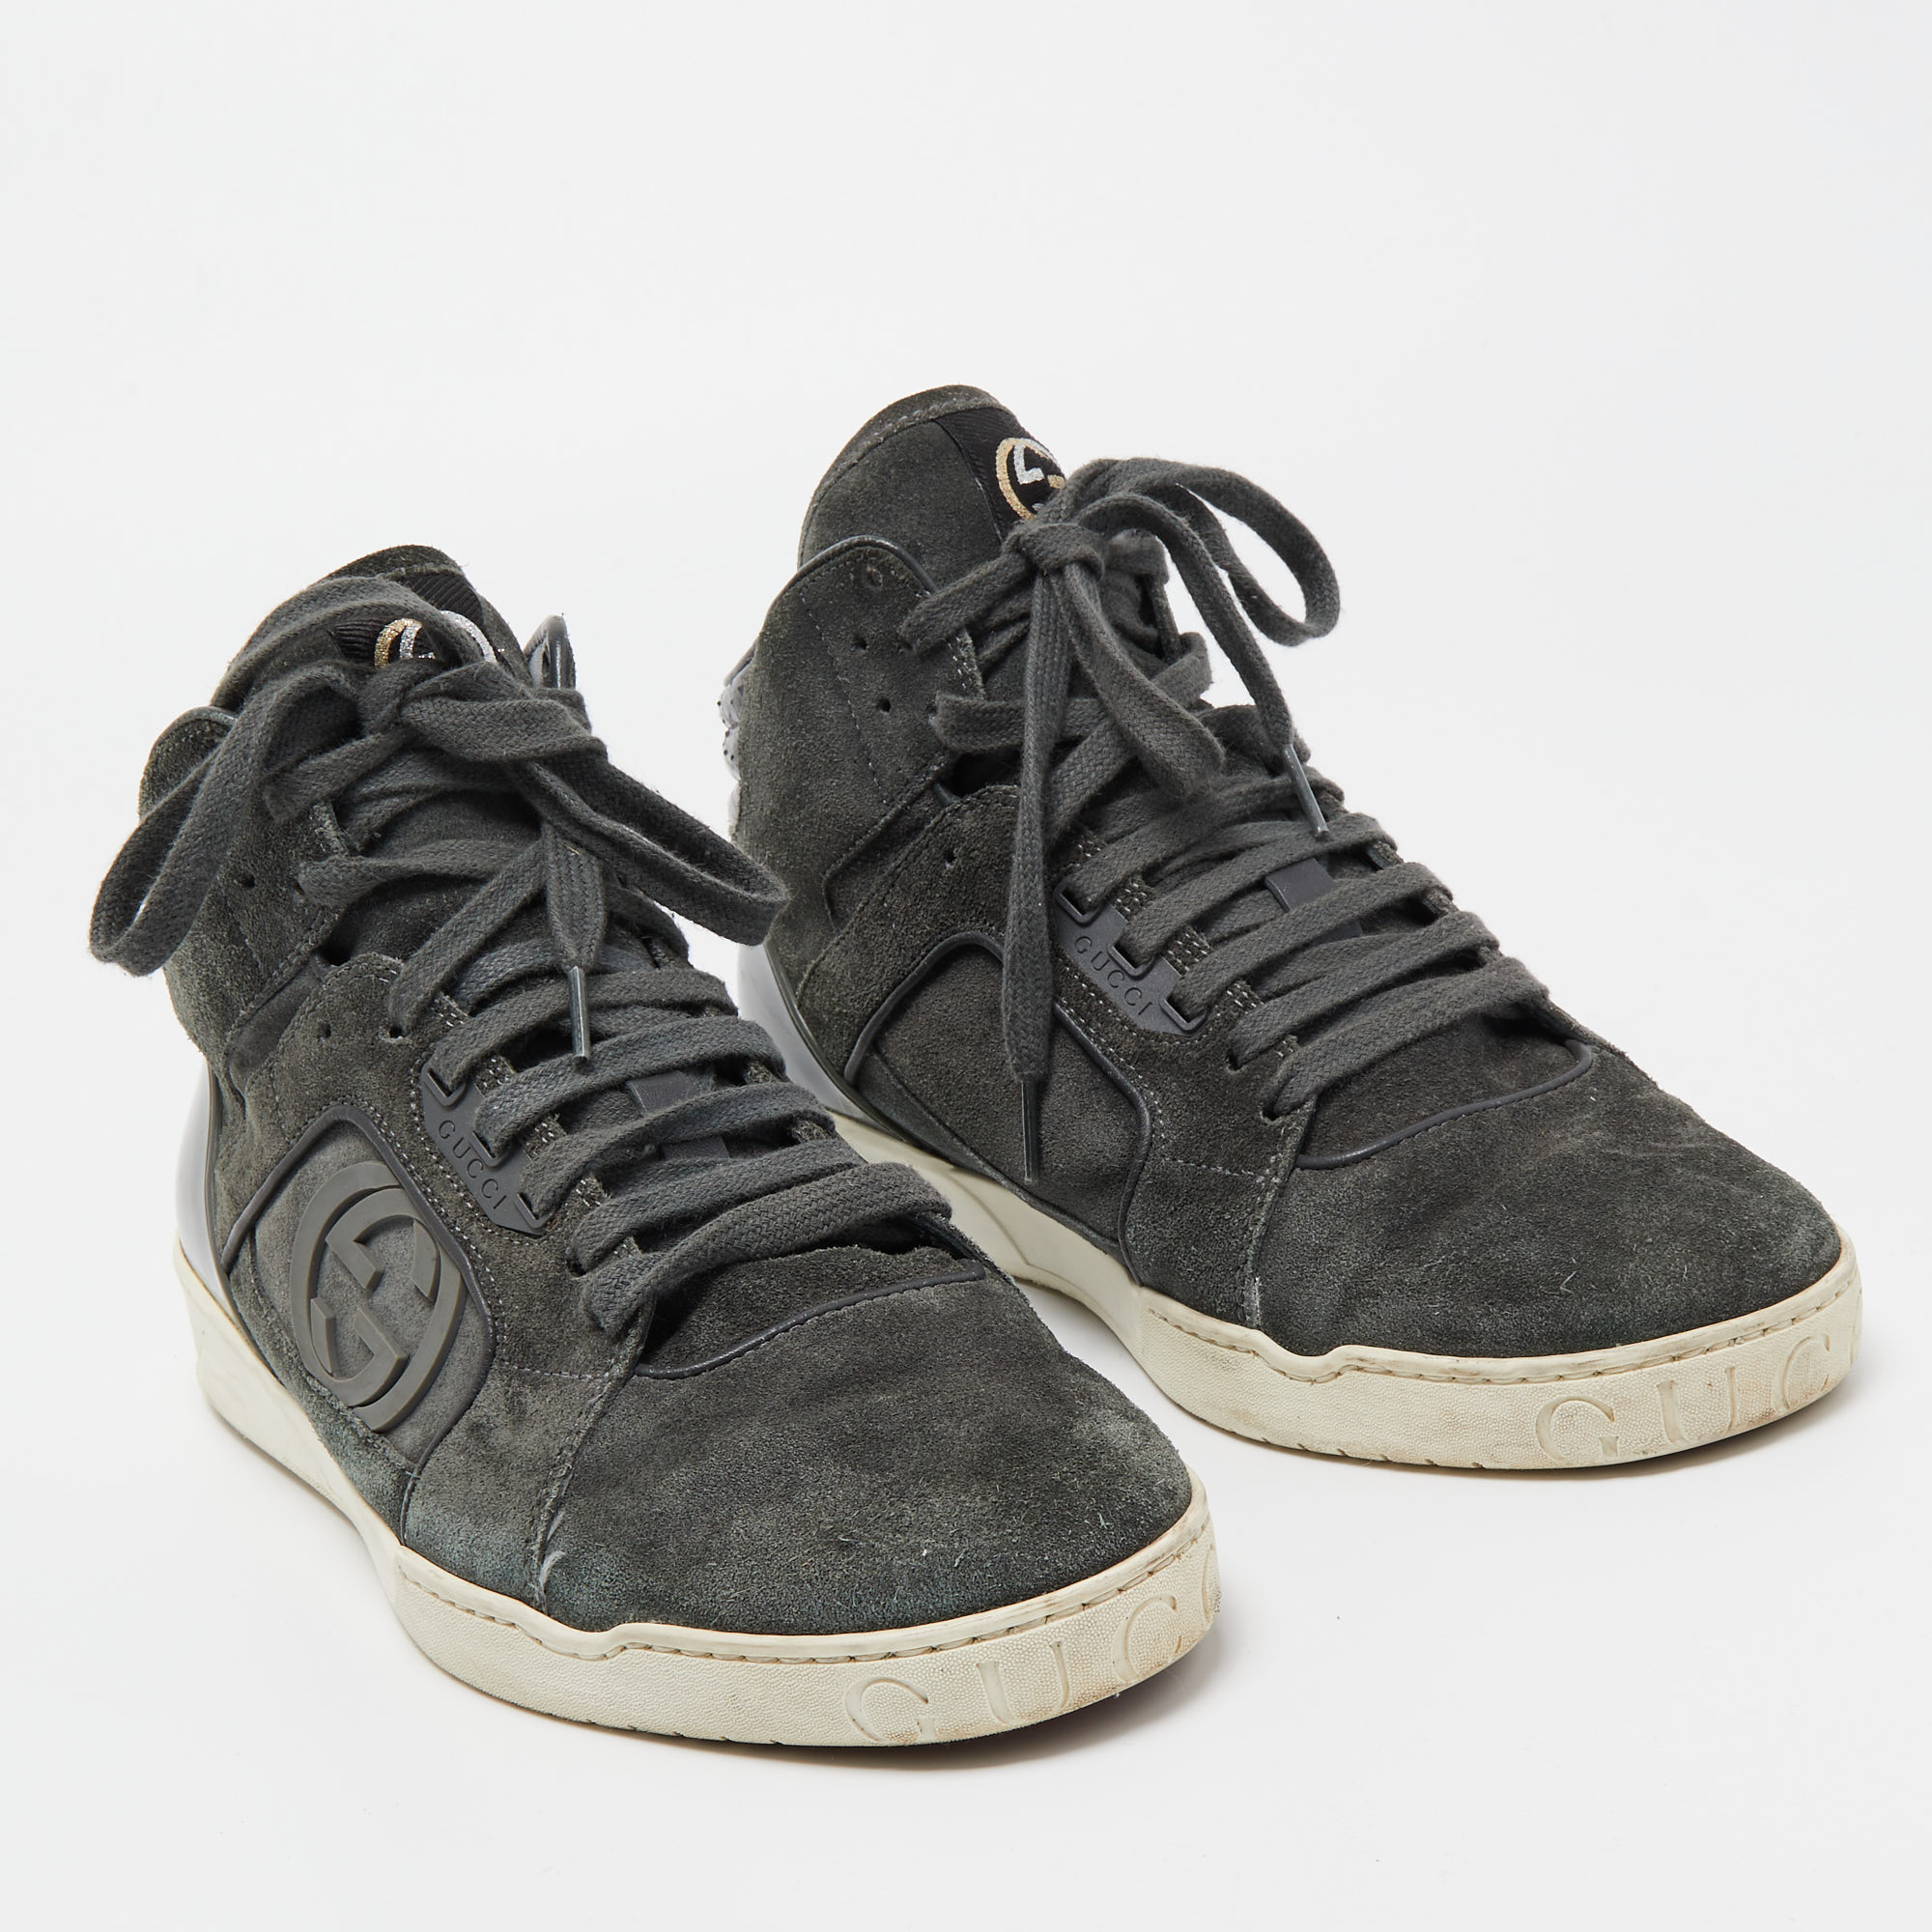 Gucci Grey Suede Interlocking G High Top Sneakers Size 41.5